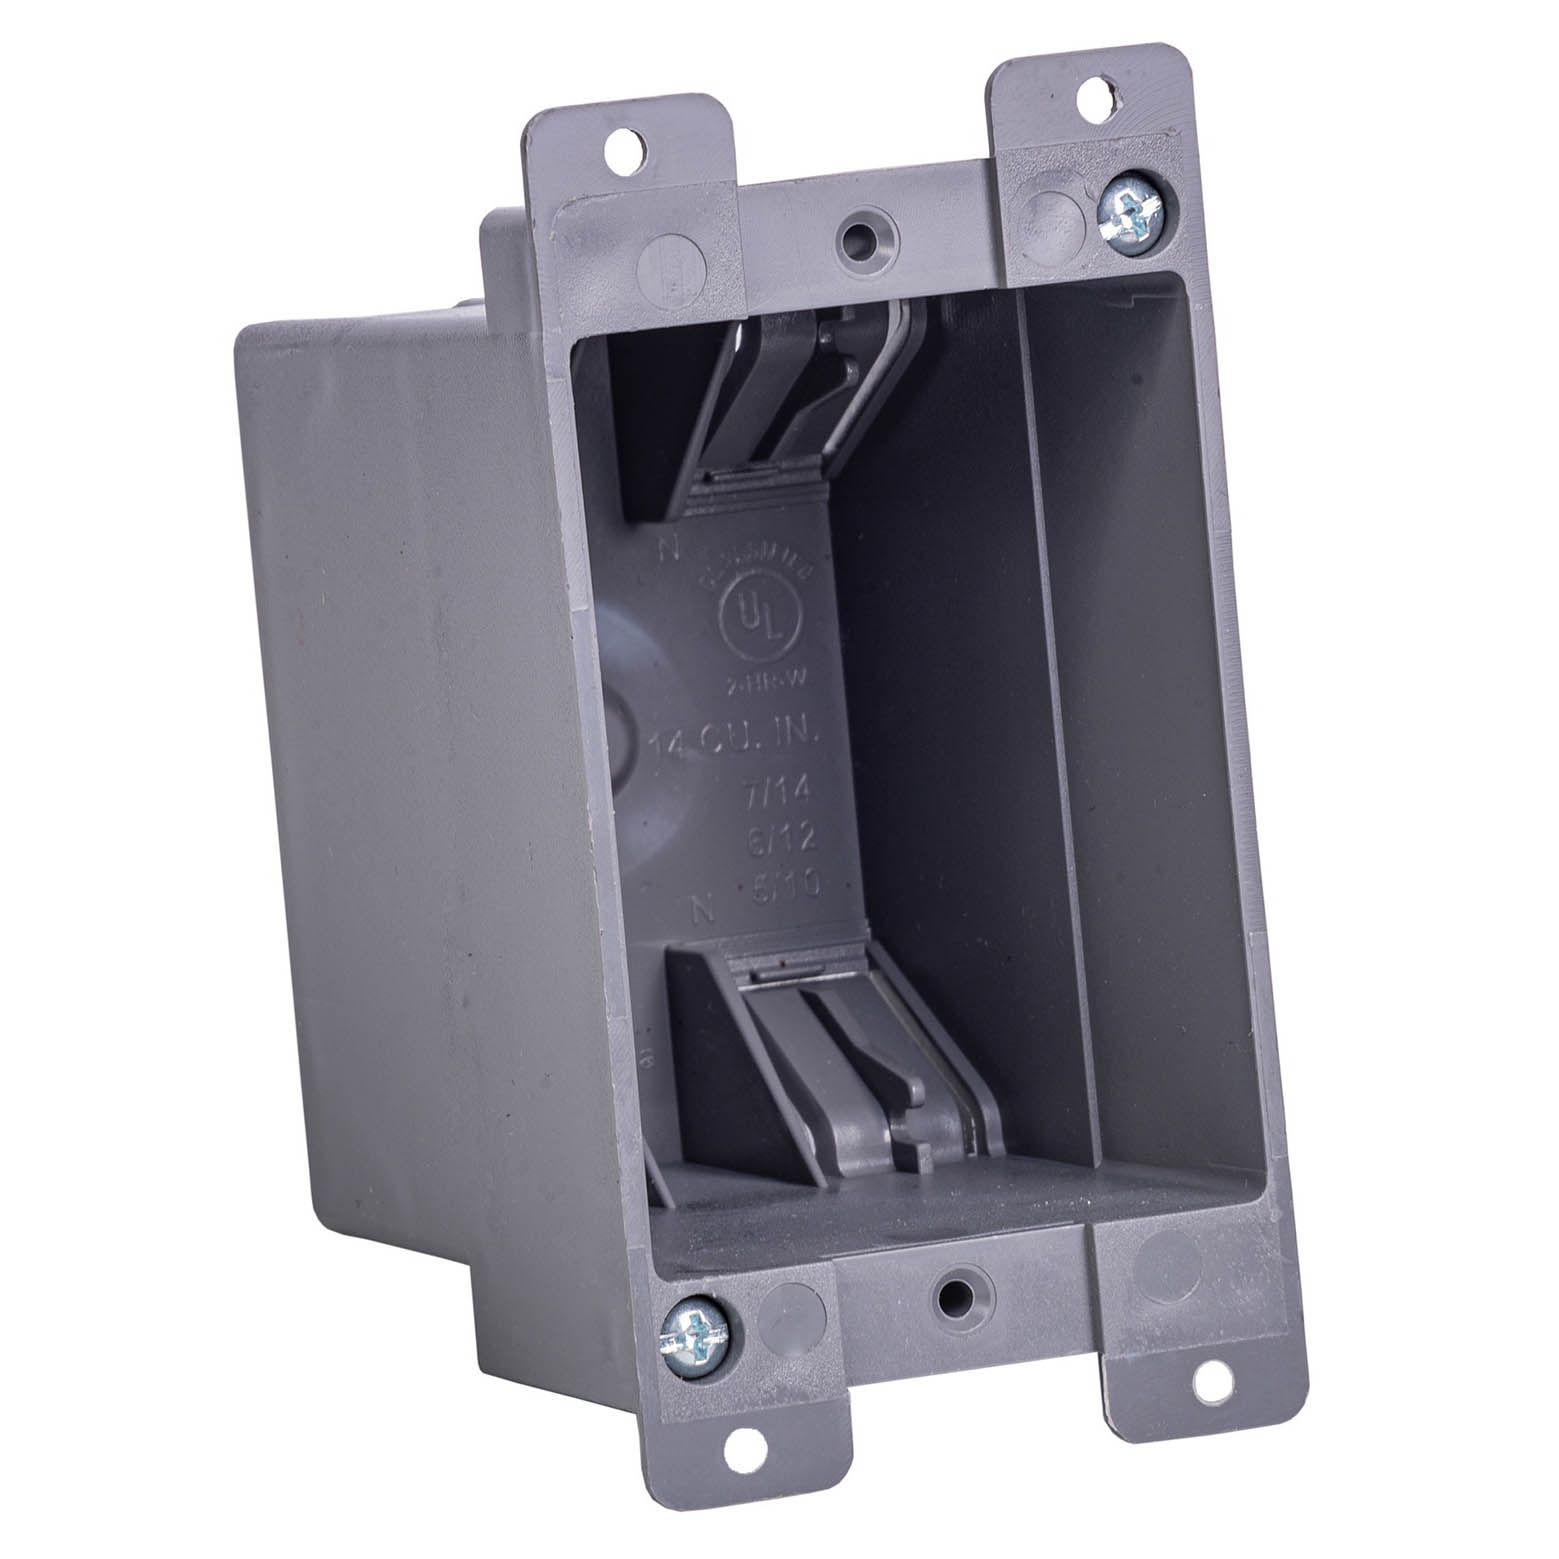 BOX-RS14 Switch/Outlet Box, Standard Outlet, 1-Gang, 4-Knockout, PVC, Gray, In-Wall Mounting